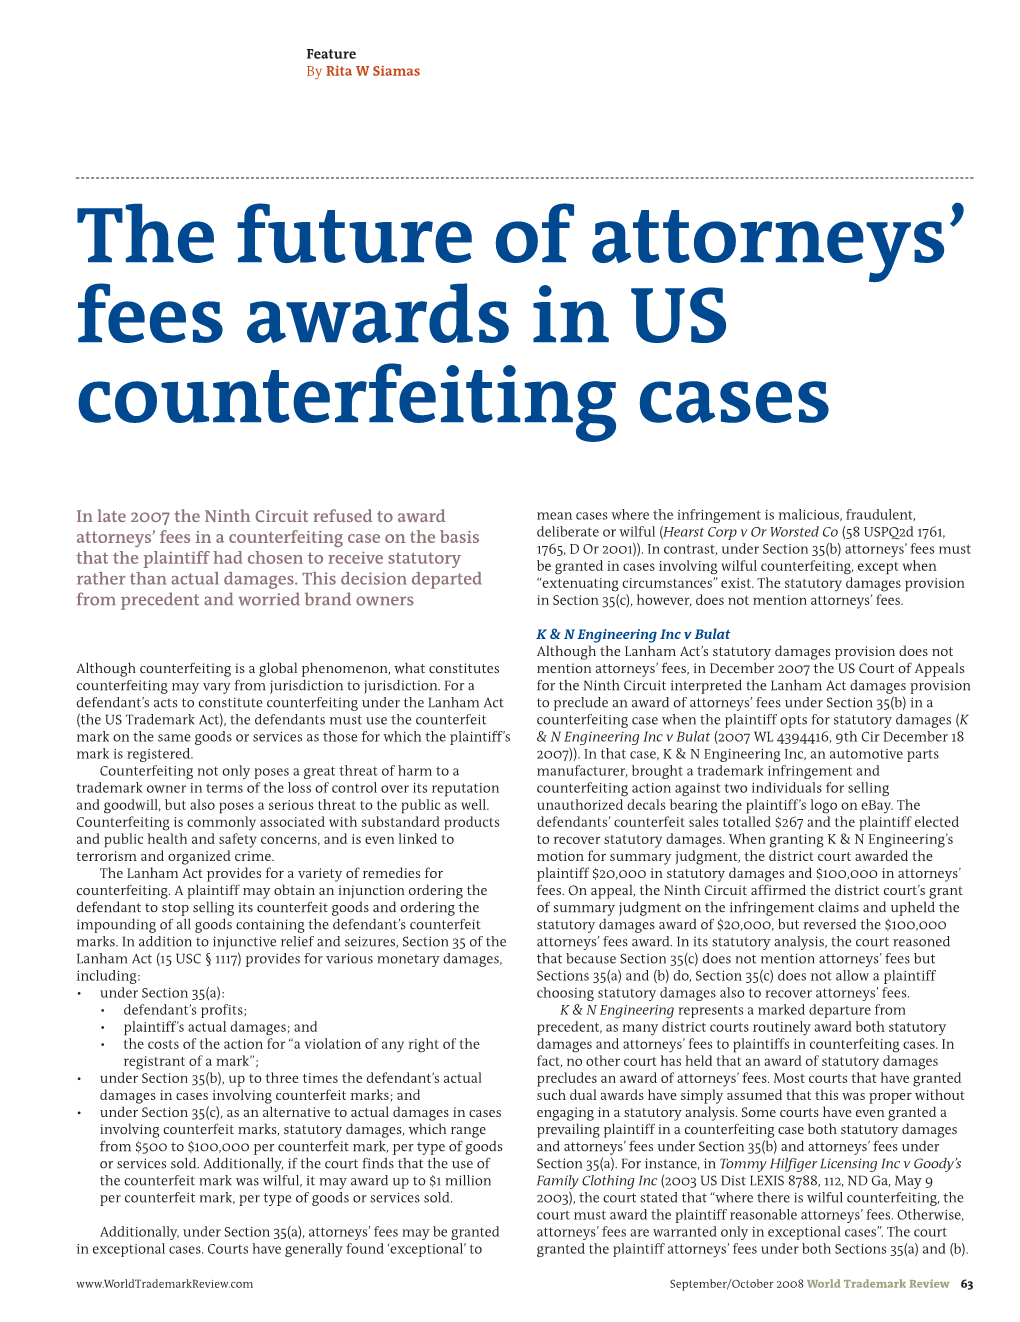 The Future of Attorneys' Fees Awards in US Counterfeiting Cases